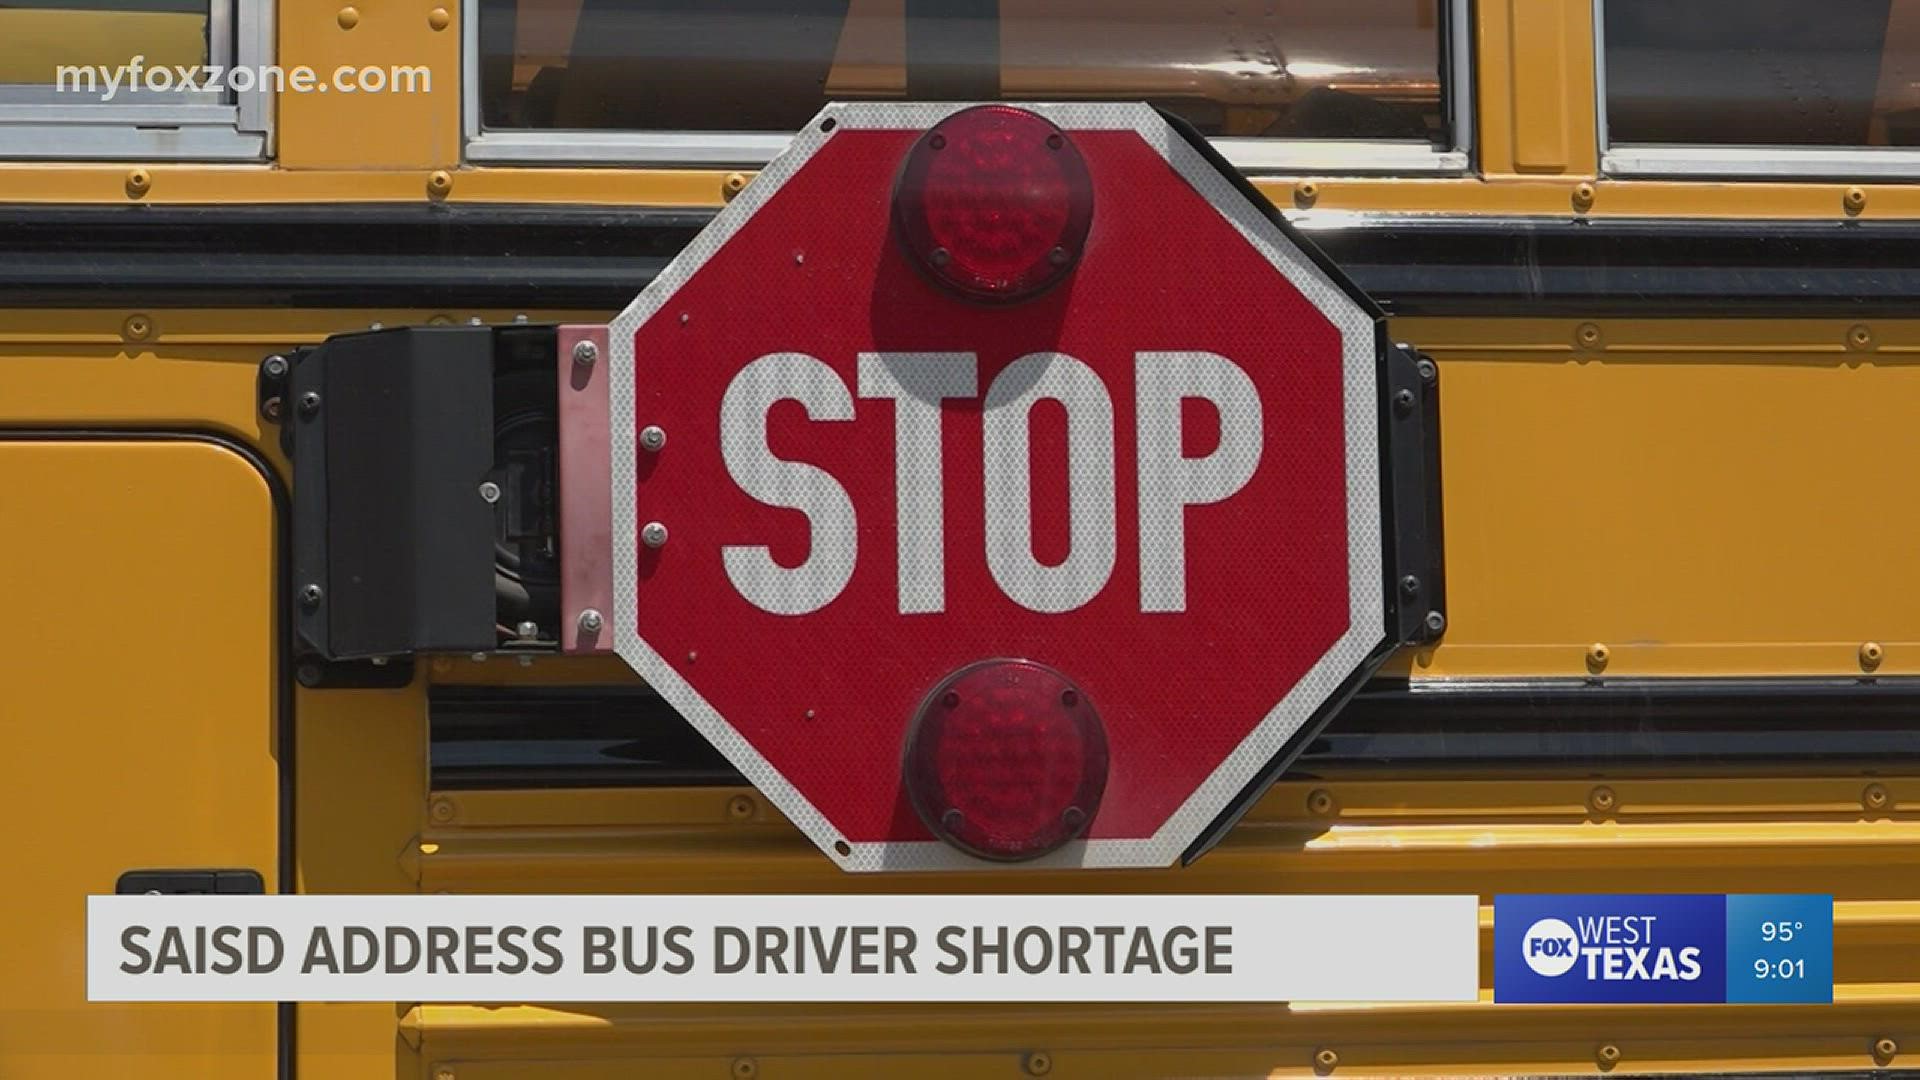 The district said it is experiencing "an unprecedented bus driver shortage and increased student ridership."